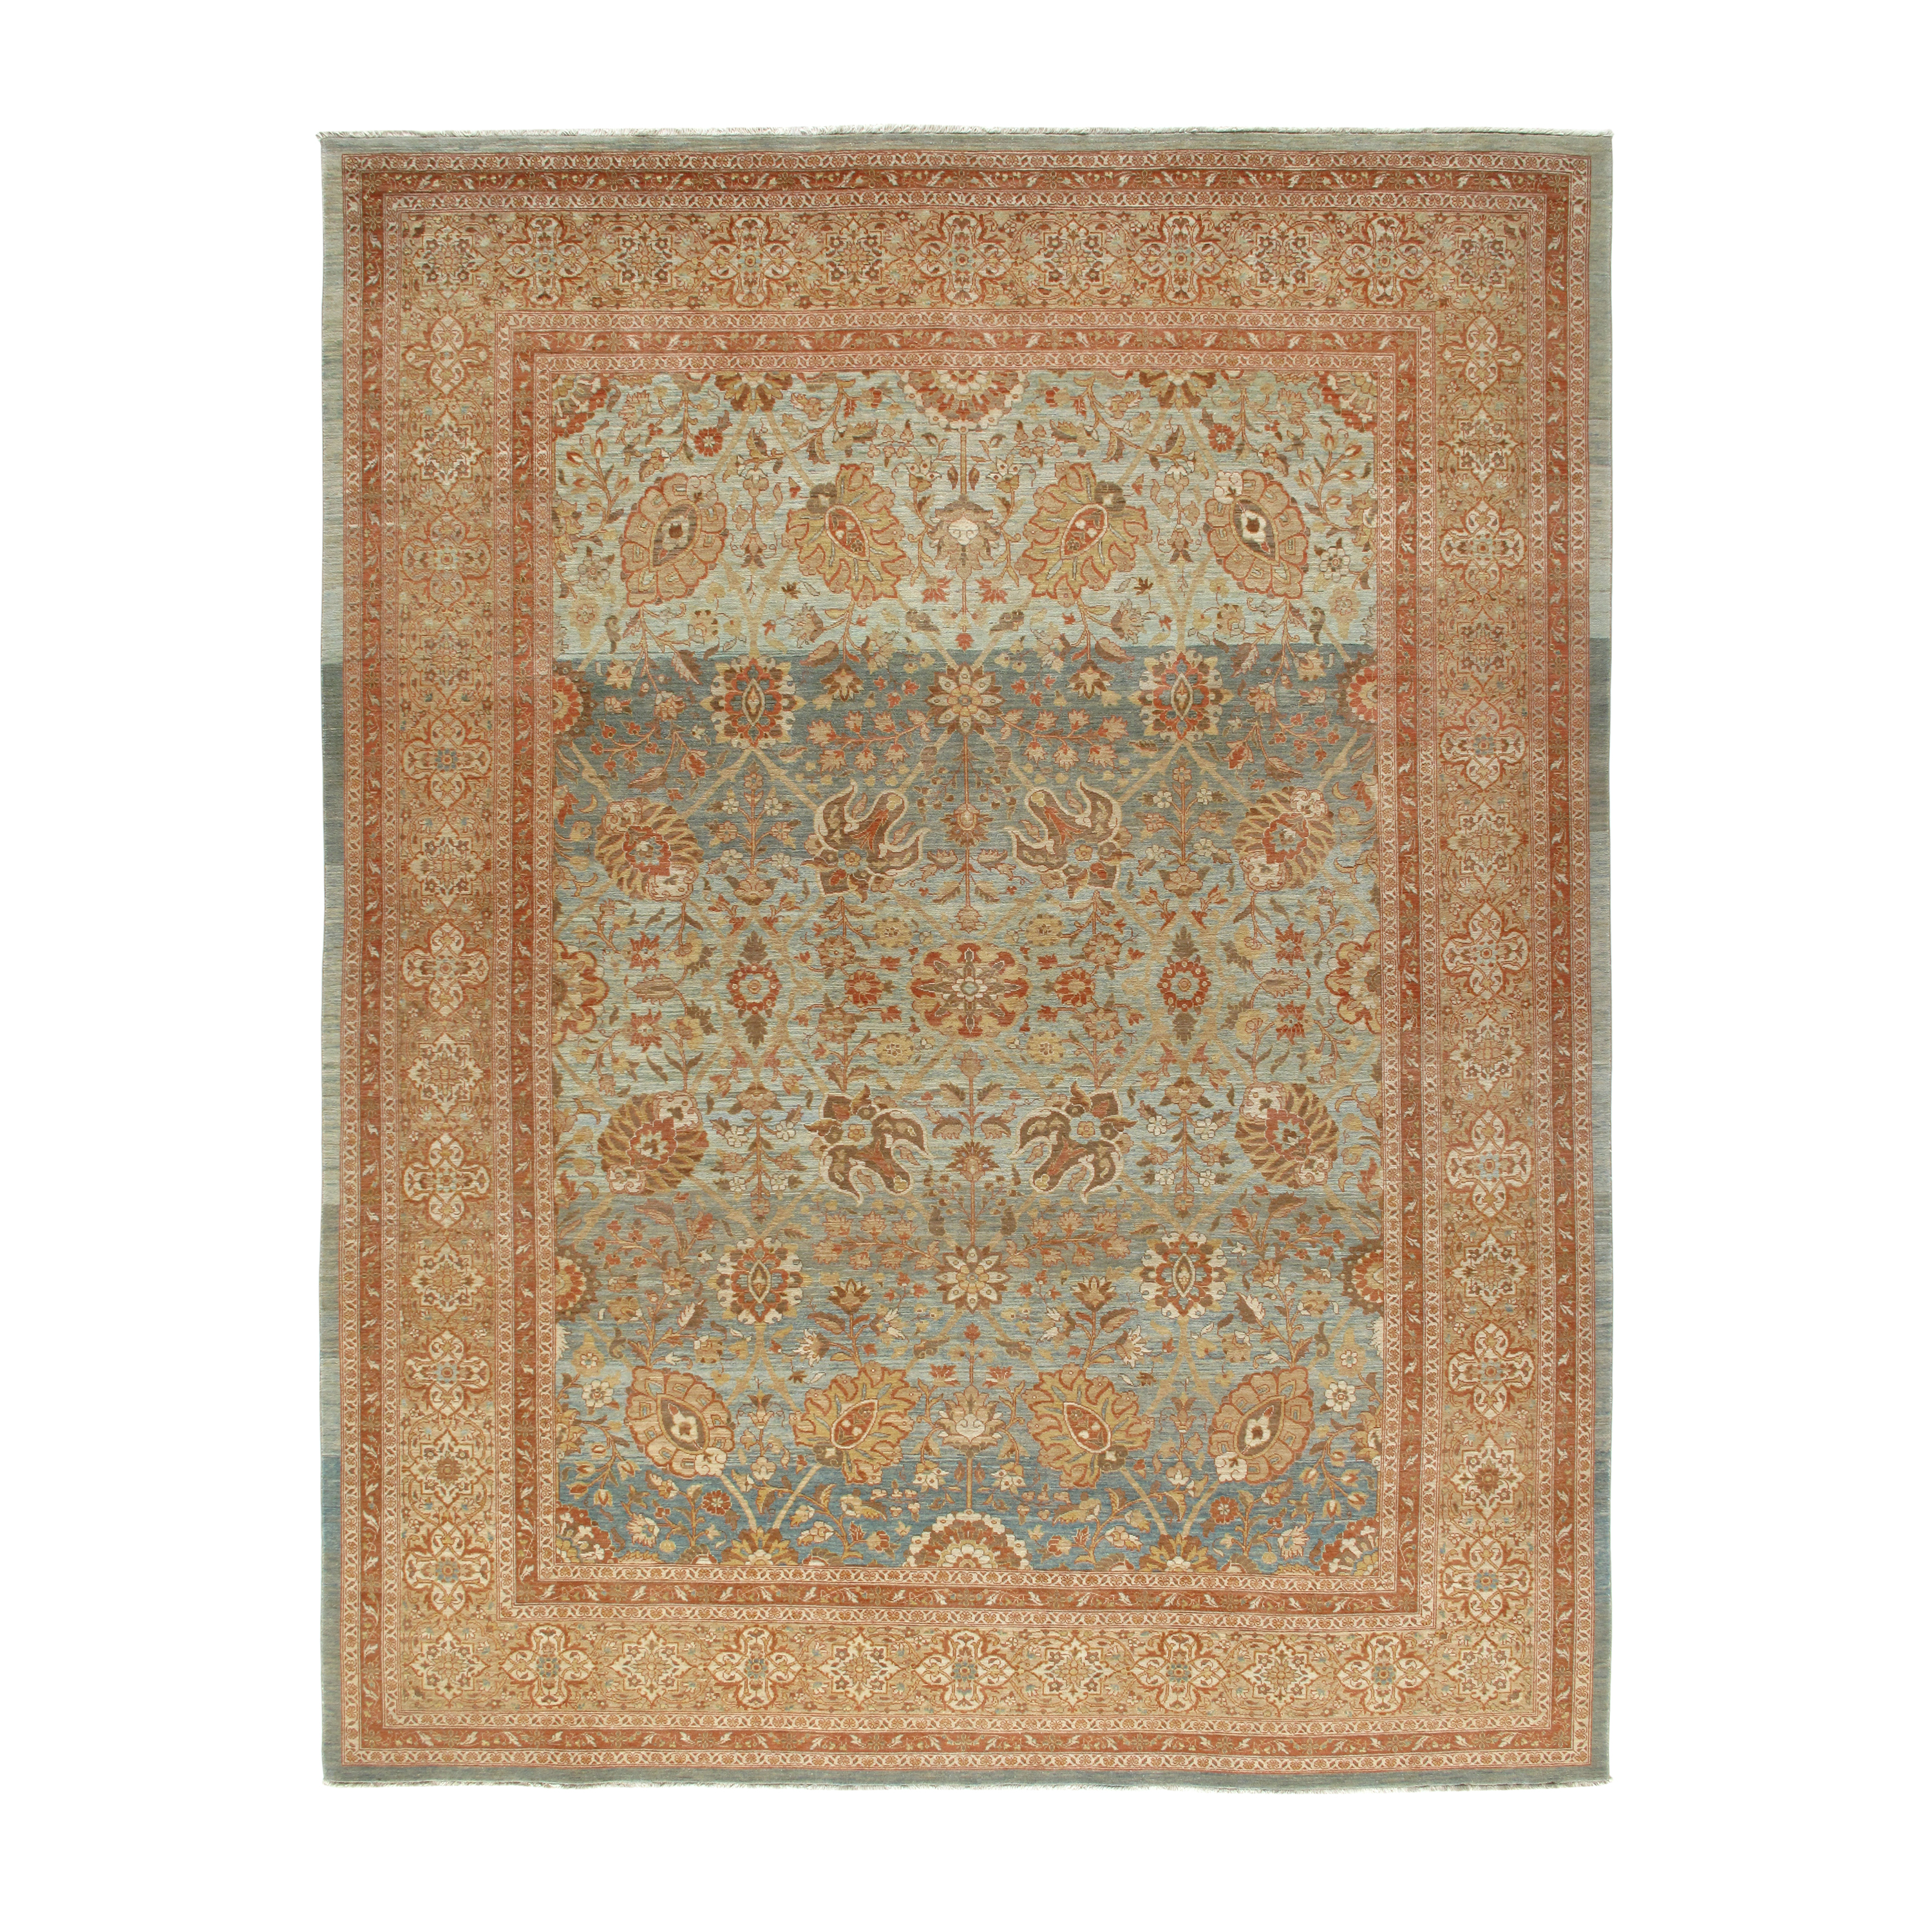 Persian Tabriz rug resembles the rare and collectible antique Hadji Jalili Tabriz rugs that were produced in the 19th century and earlier. 